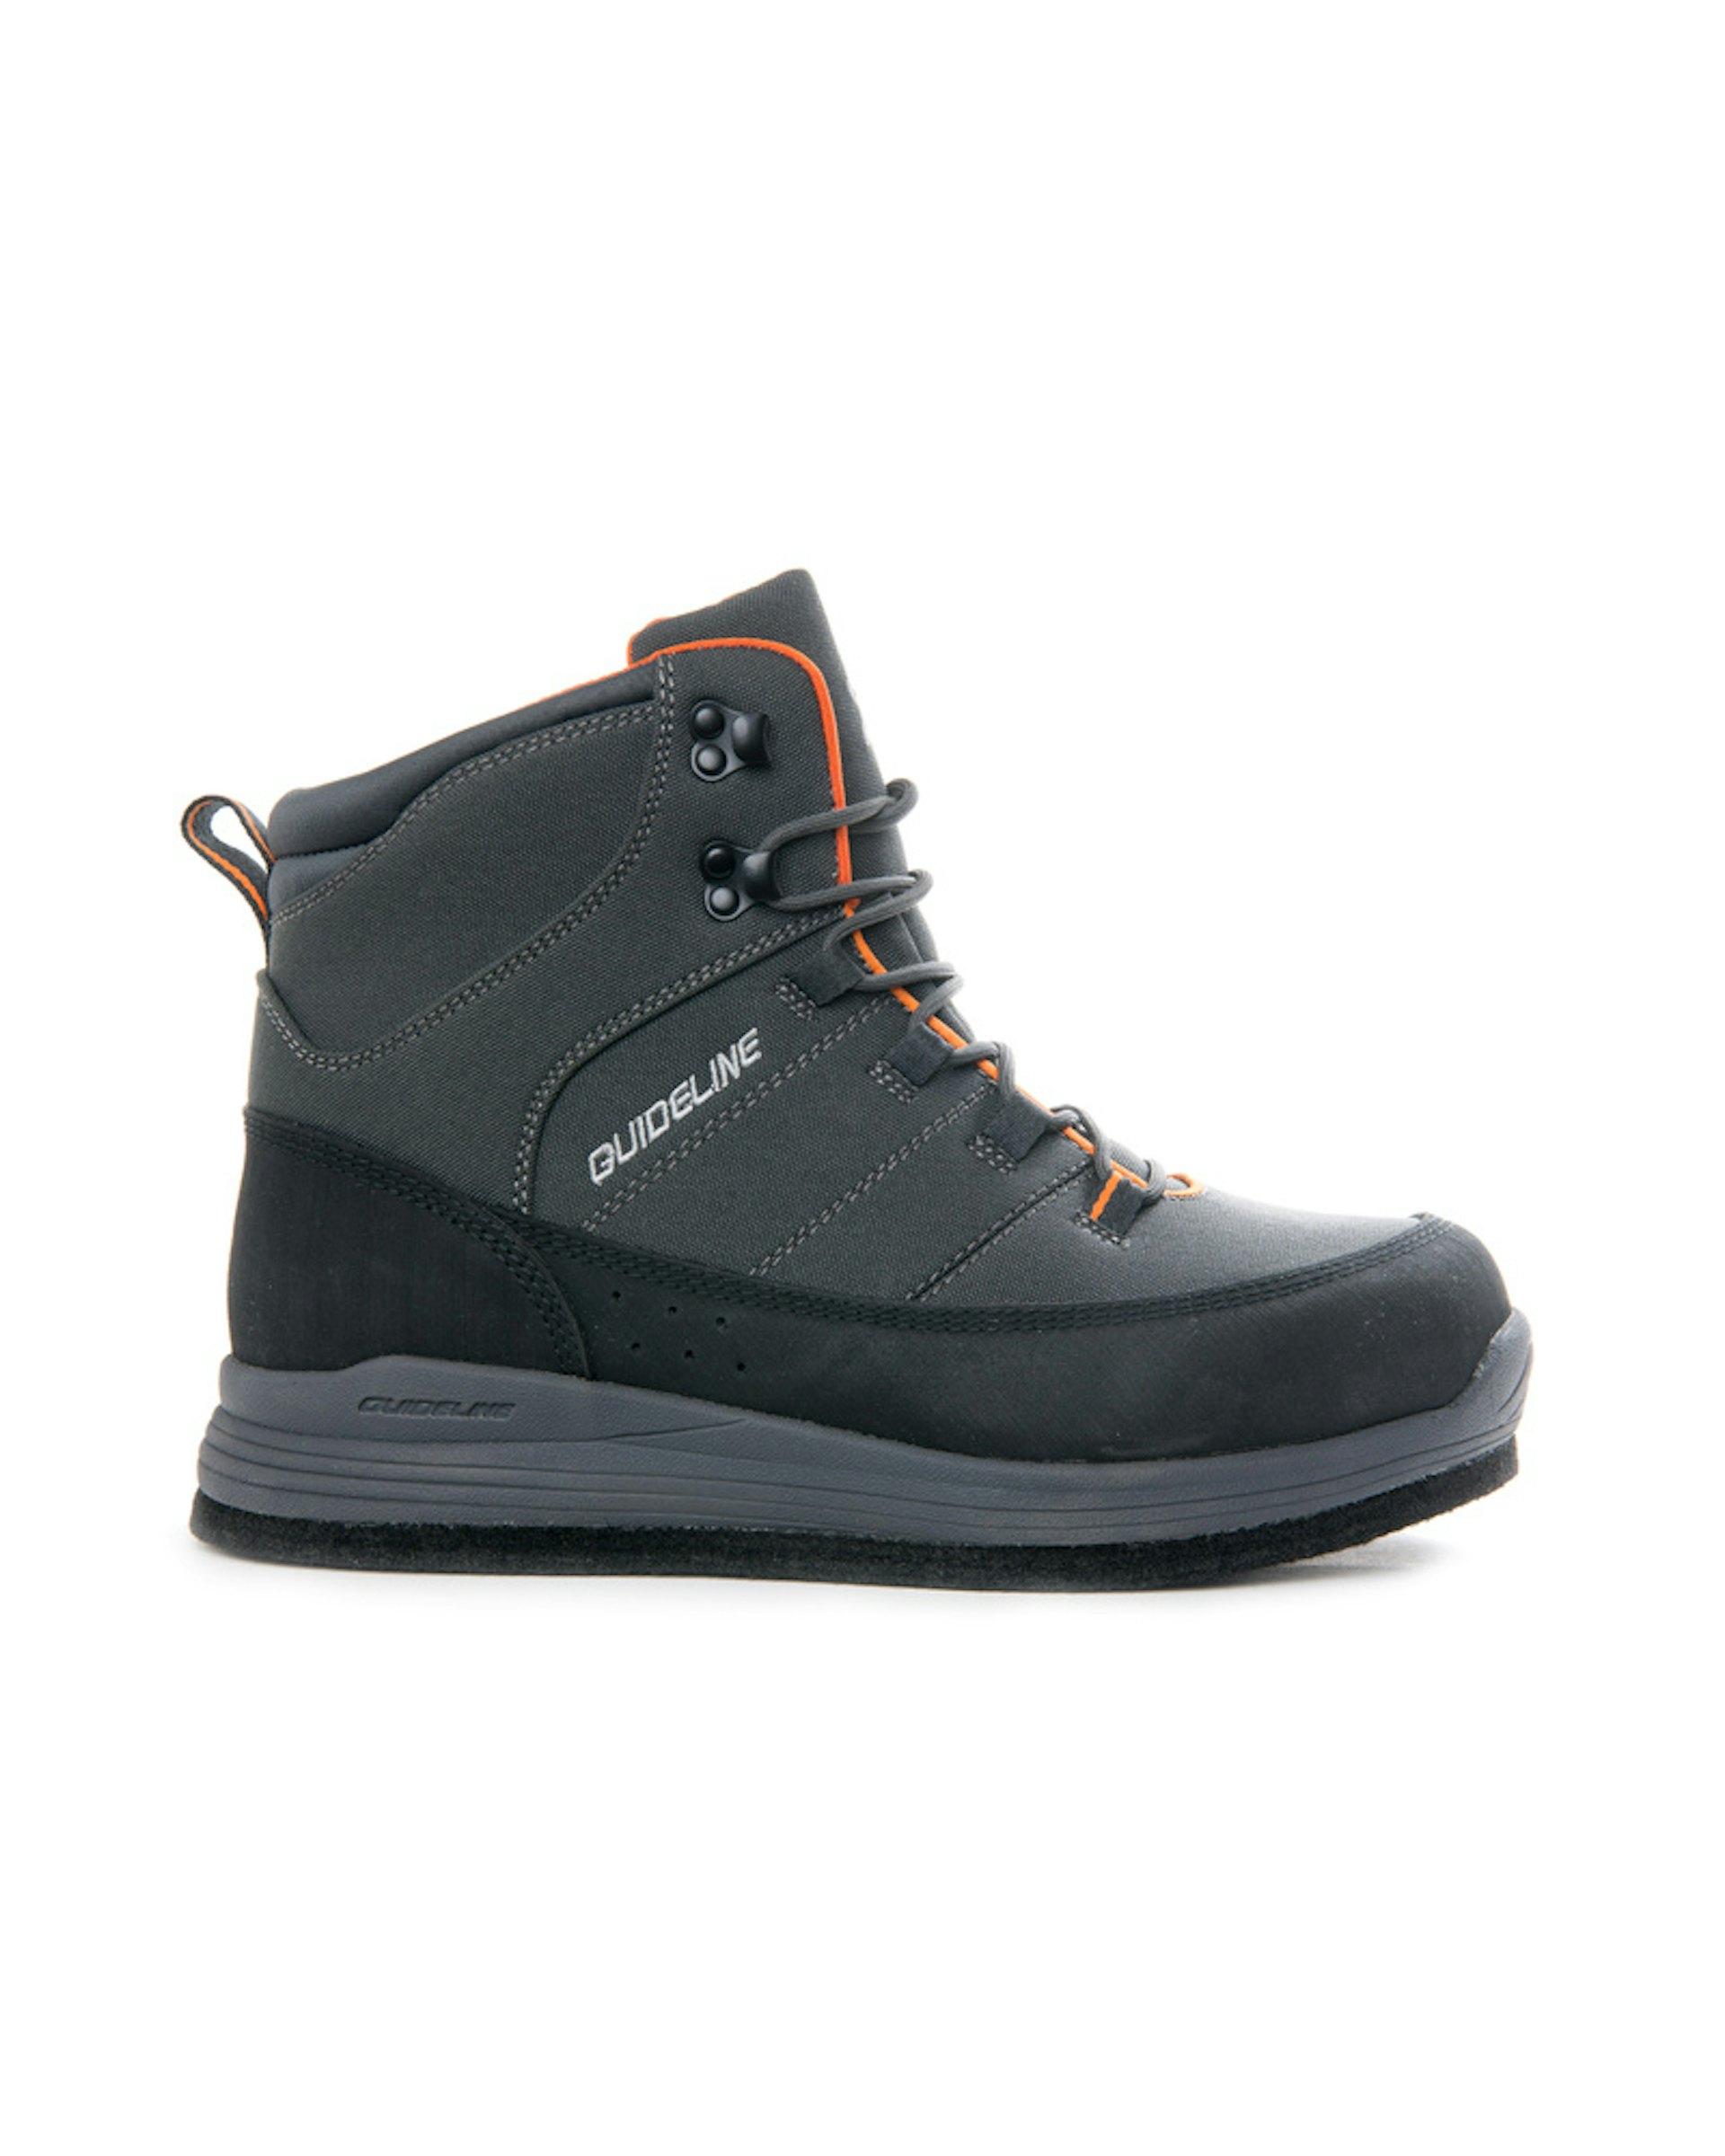 Wading Boots - Wading boots fly fishing - Wading boots fishing